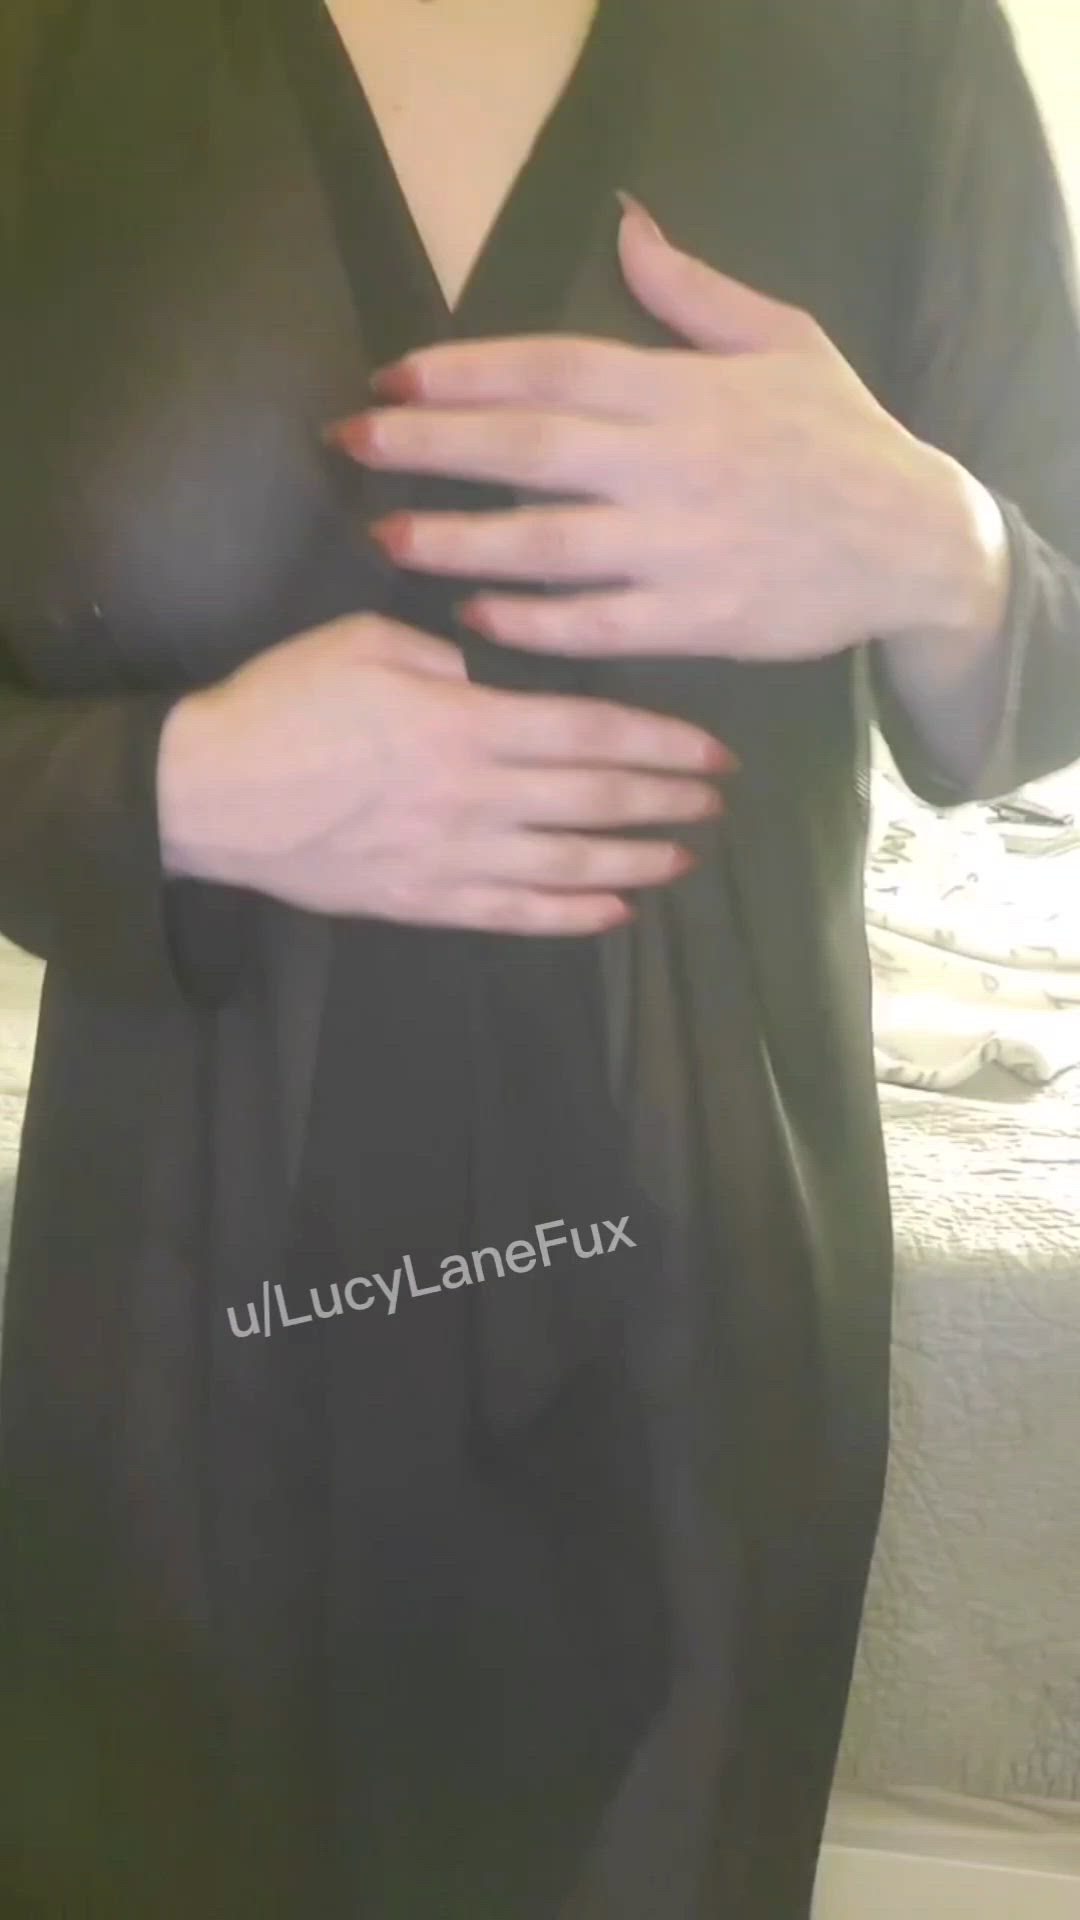 Amateur porn video with onlyfans model lucylanefux <strong>@lucylanefux1</strong>